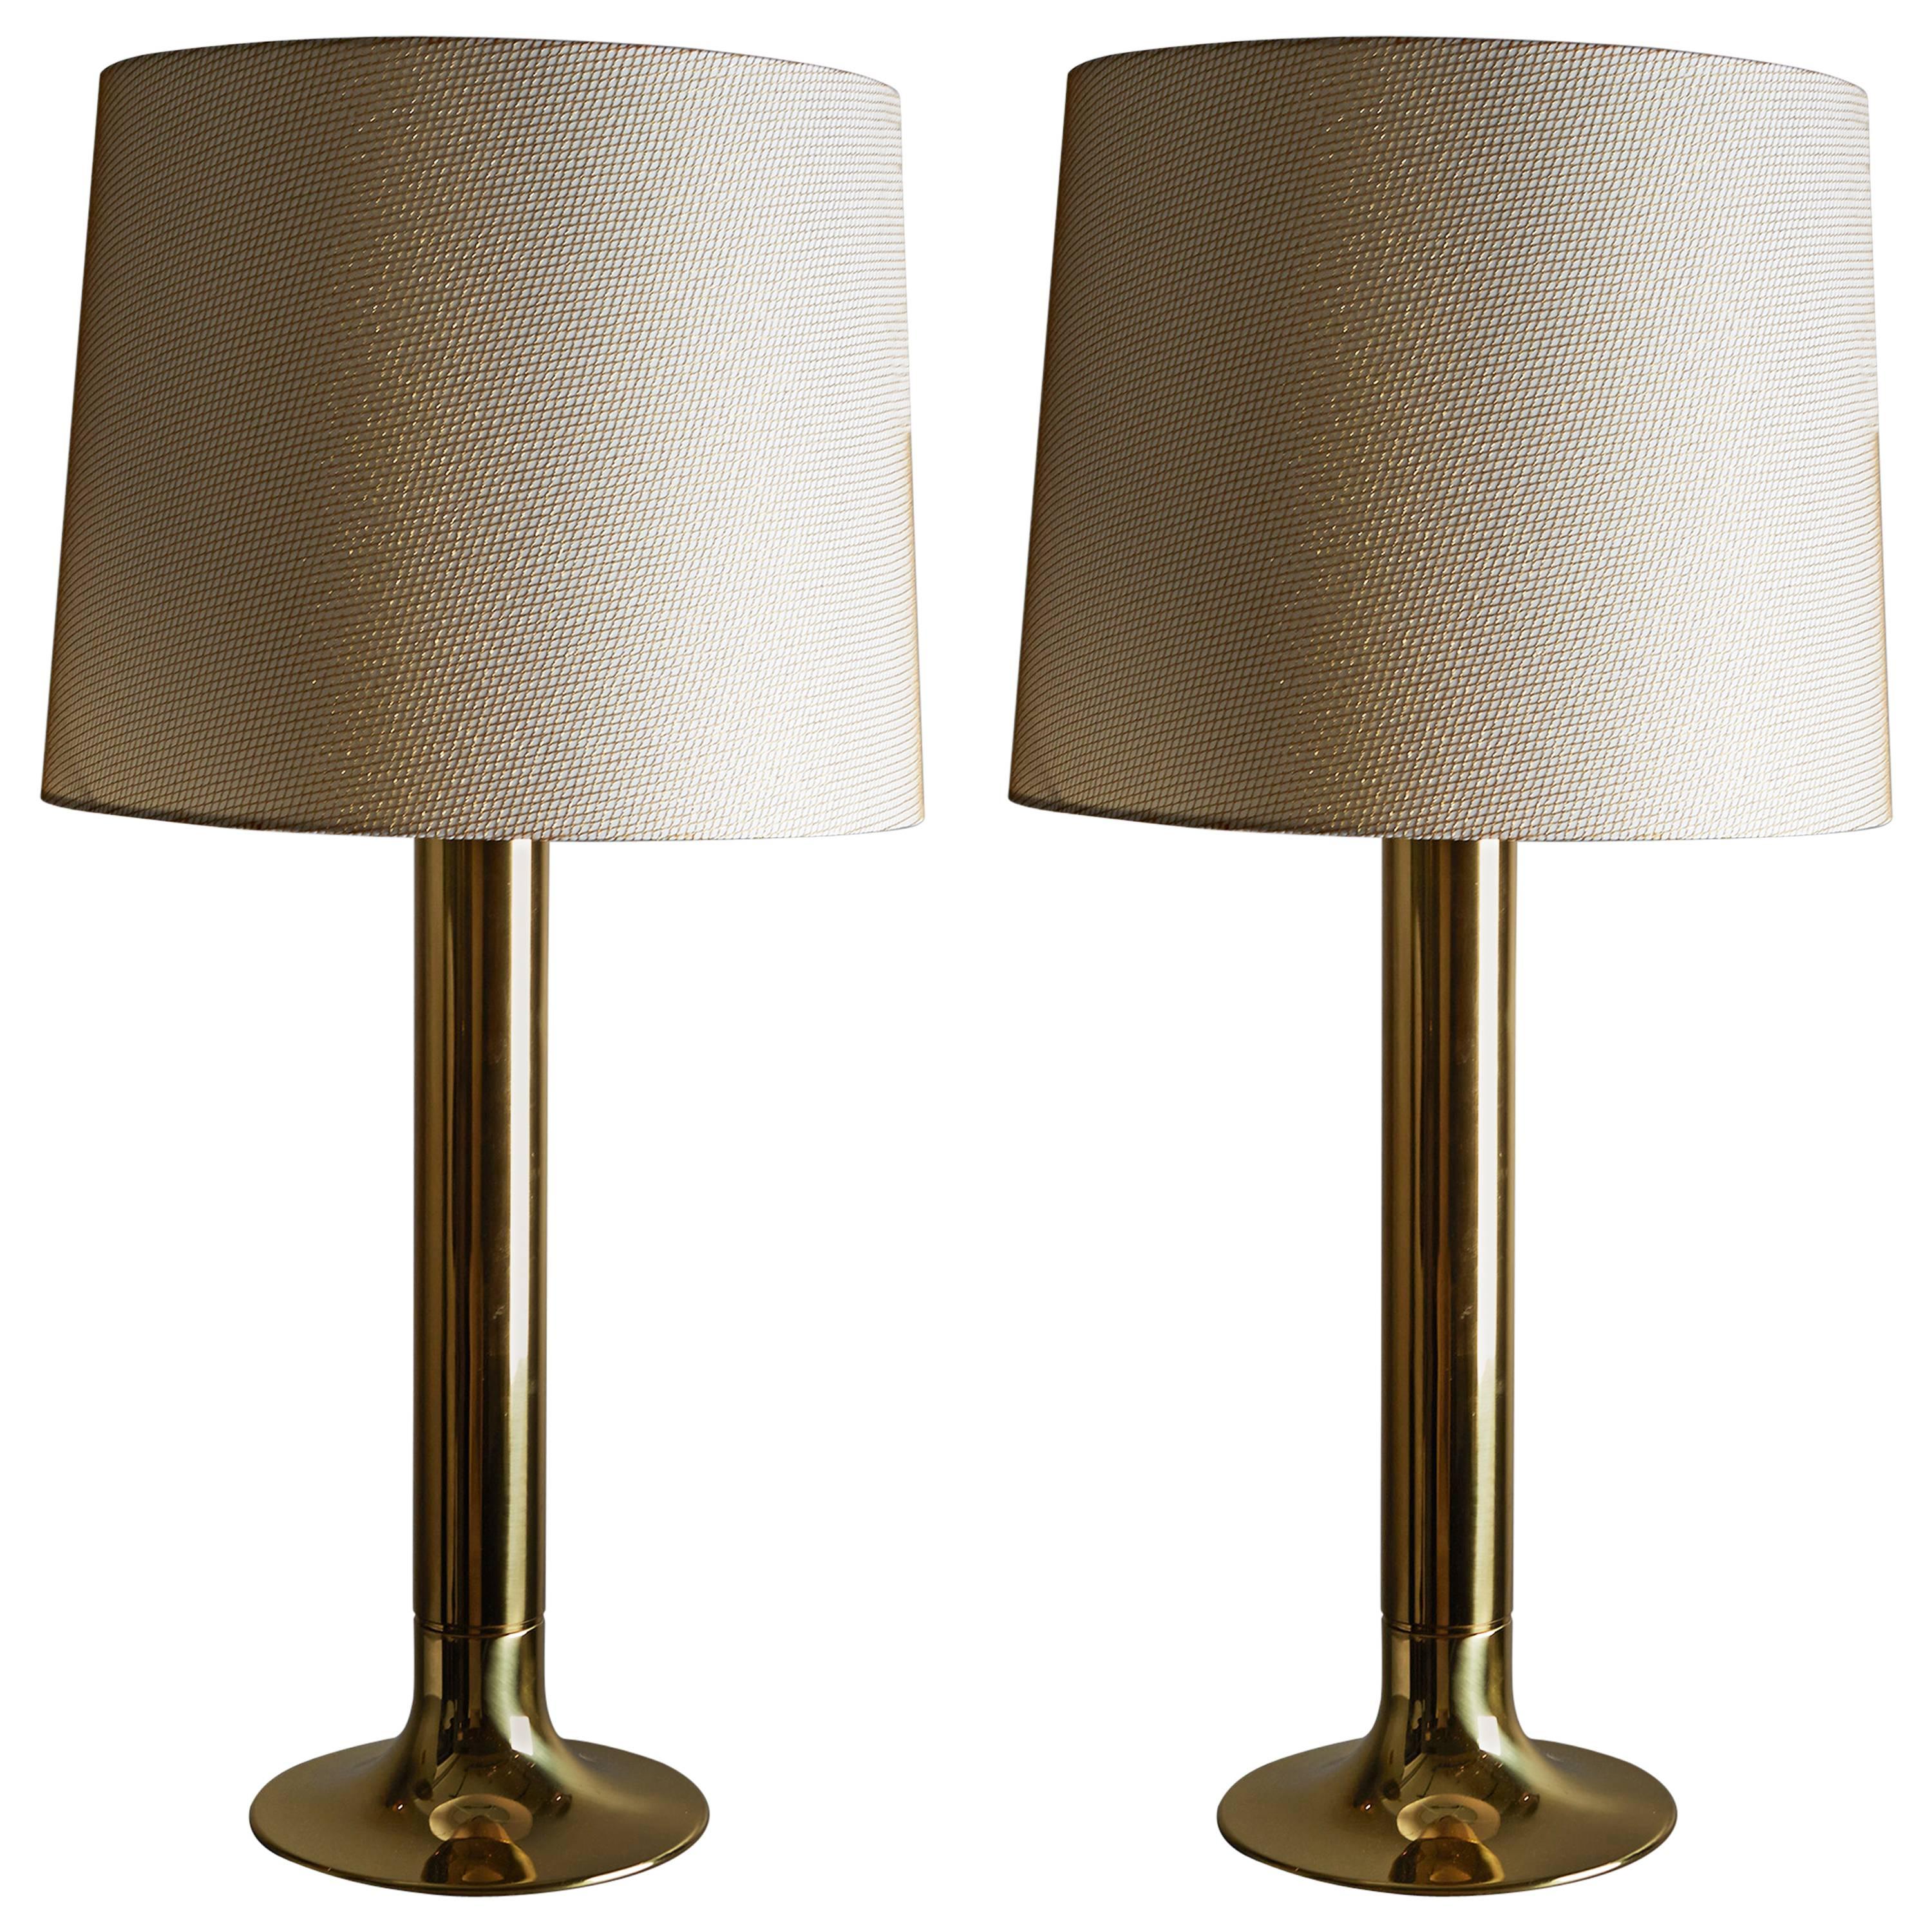 Pair of Table Lamps, by Hans-Agne Jakobsson, circa 1970